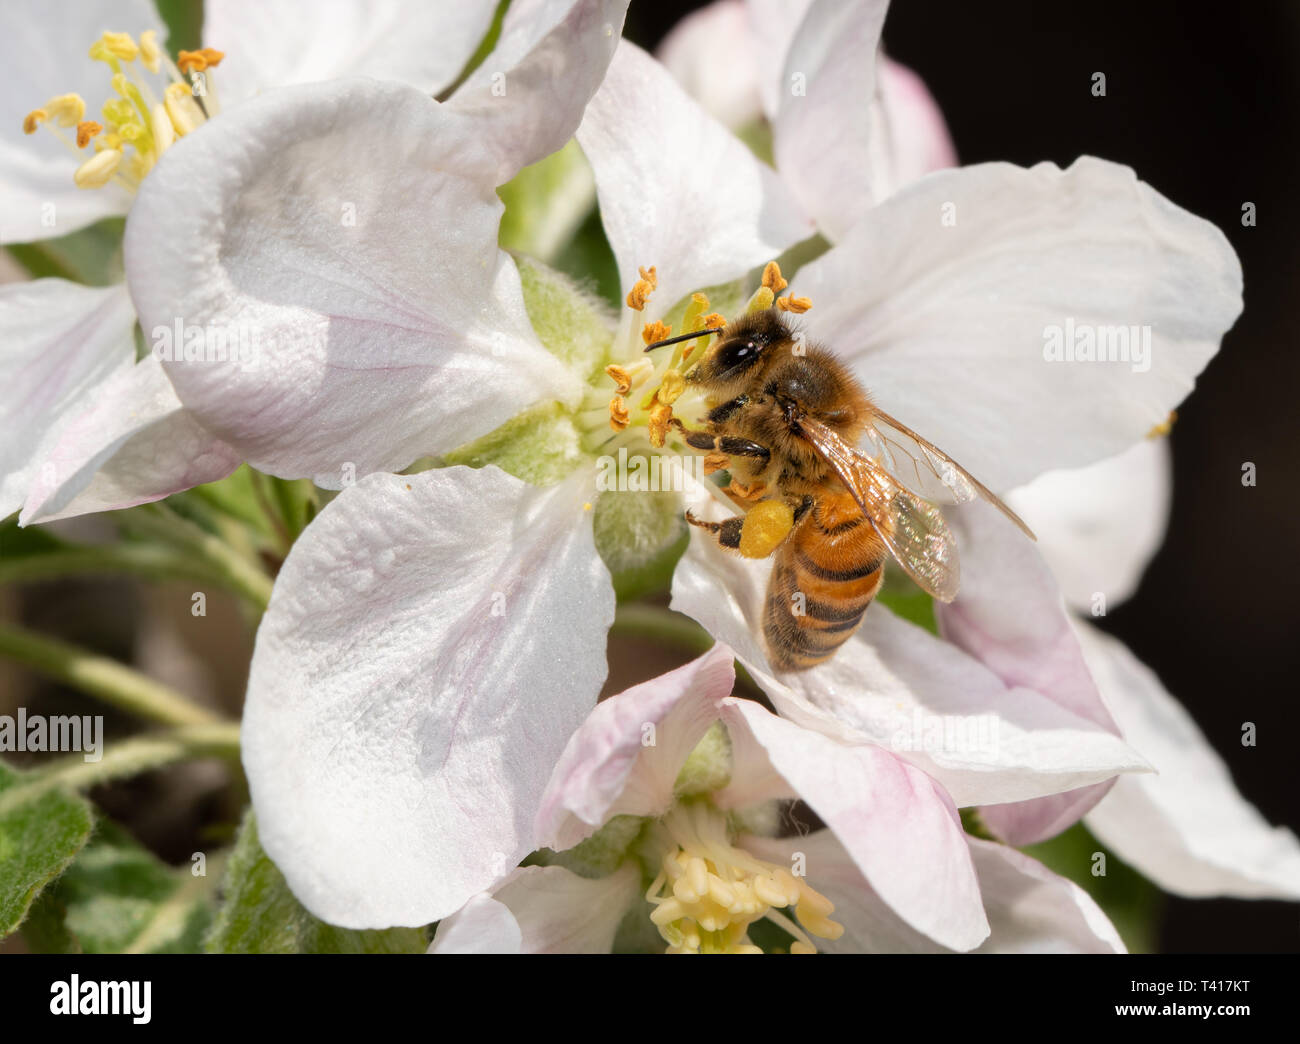 Bee collecting nectar and pollinating an apple flower in spring Stock Photo